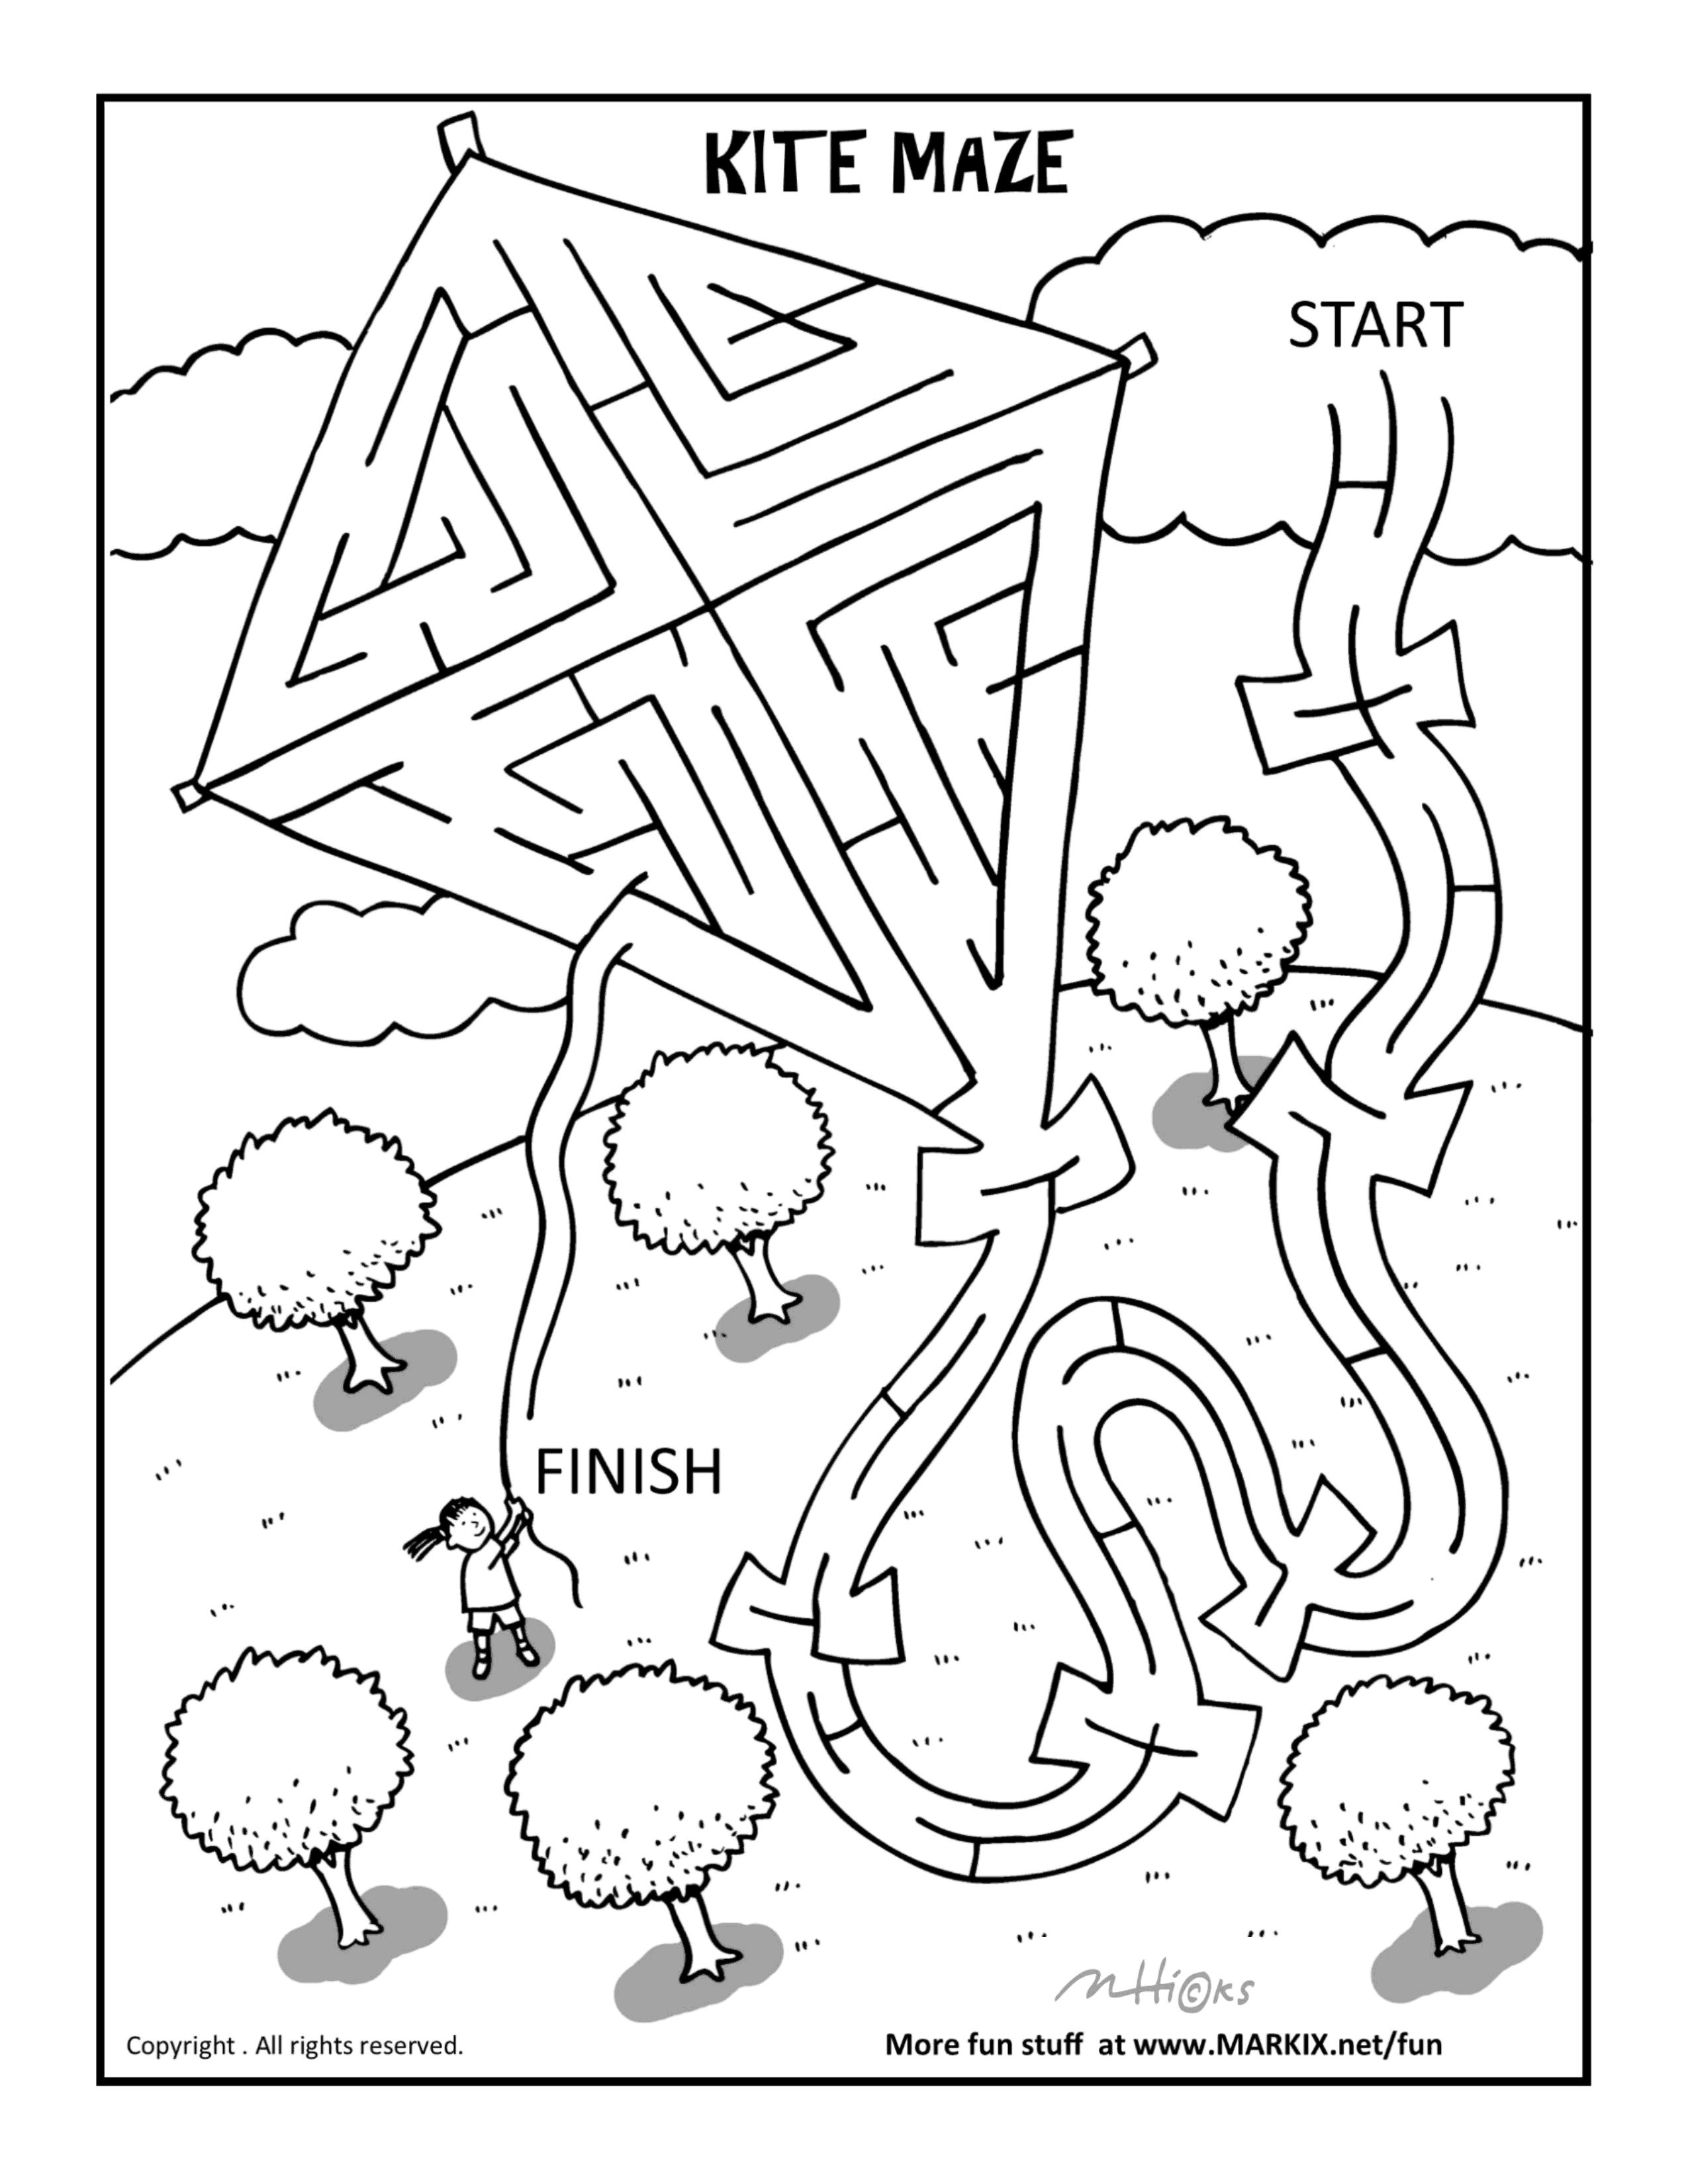 Kite Maze and Coloring Page for Kids 5 and up